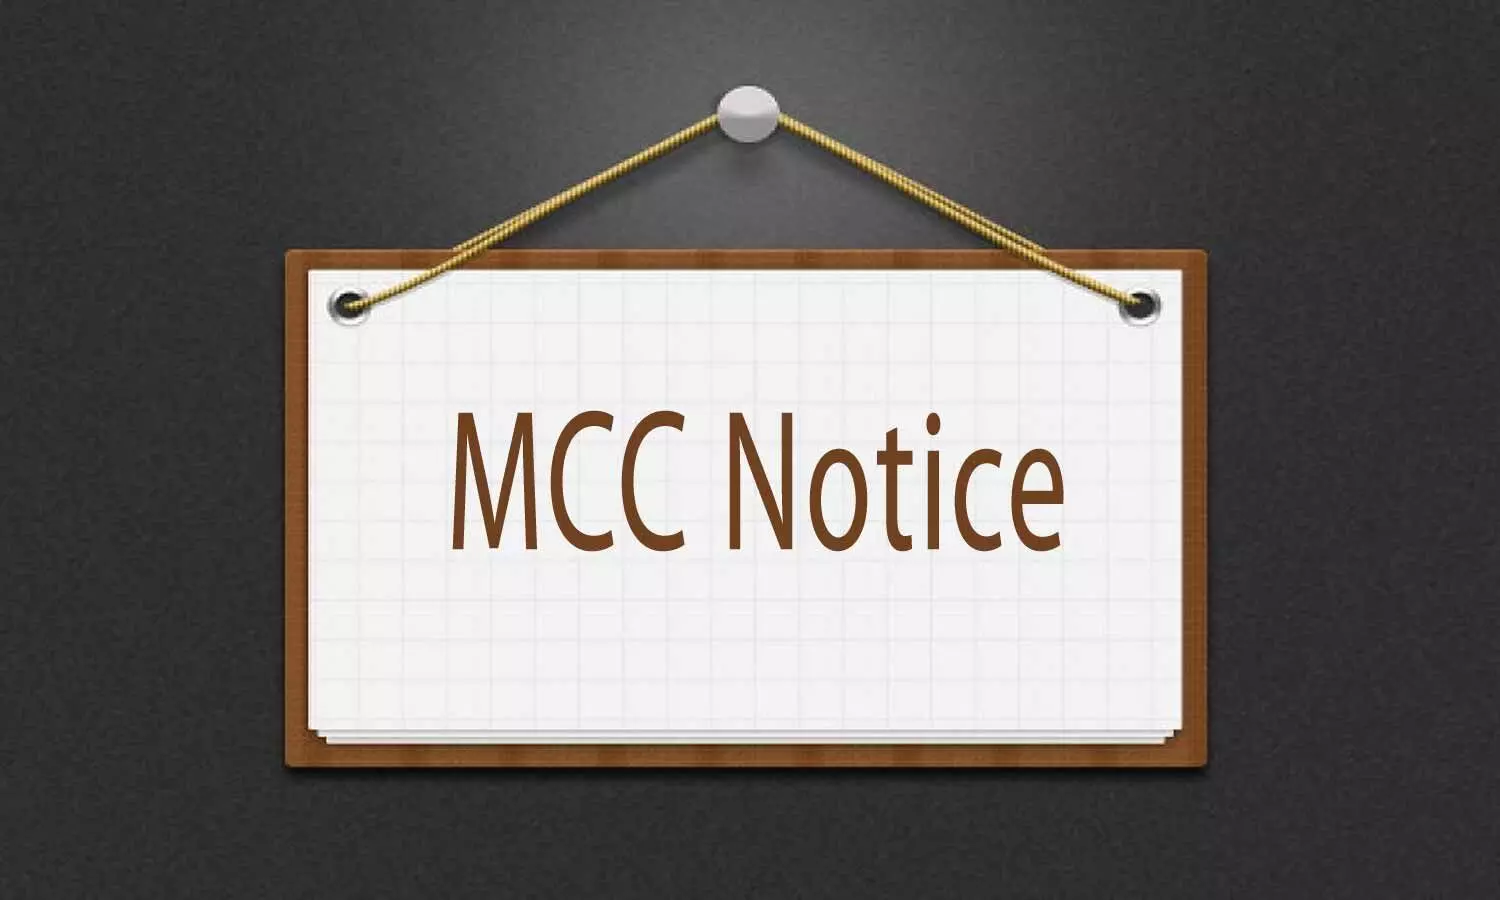 MCC Releases 2nd List Of Eligible NRI Candidates for NEET Counselling 2020